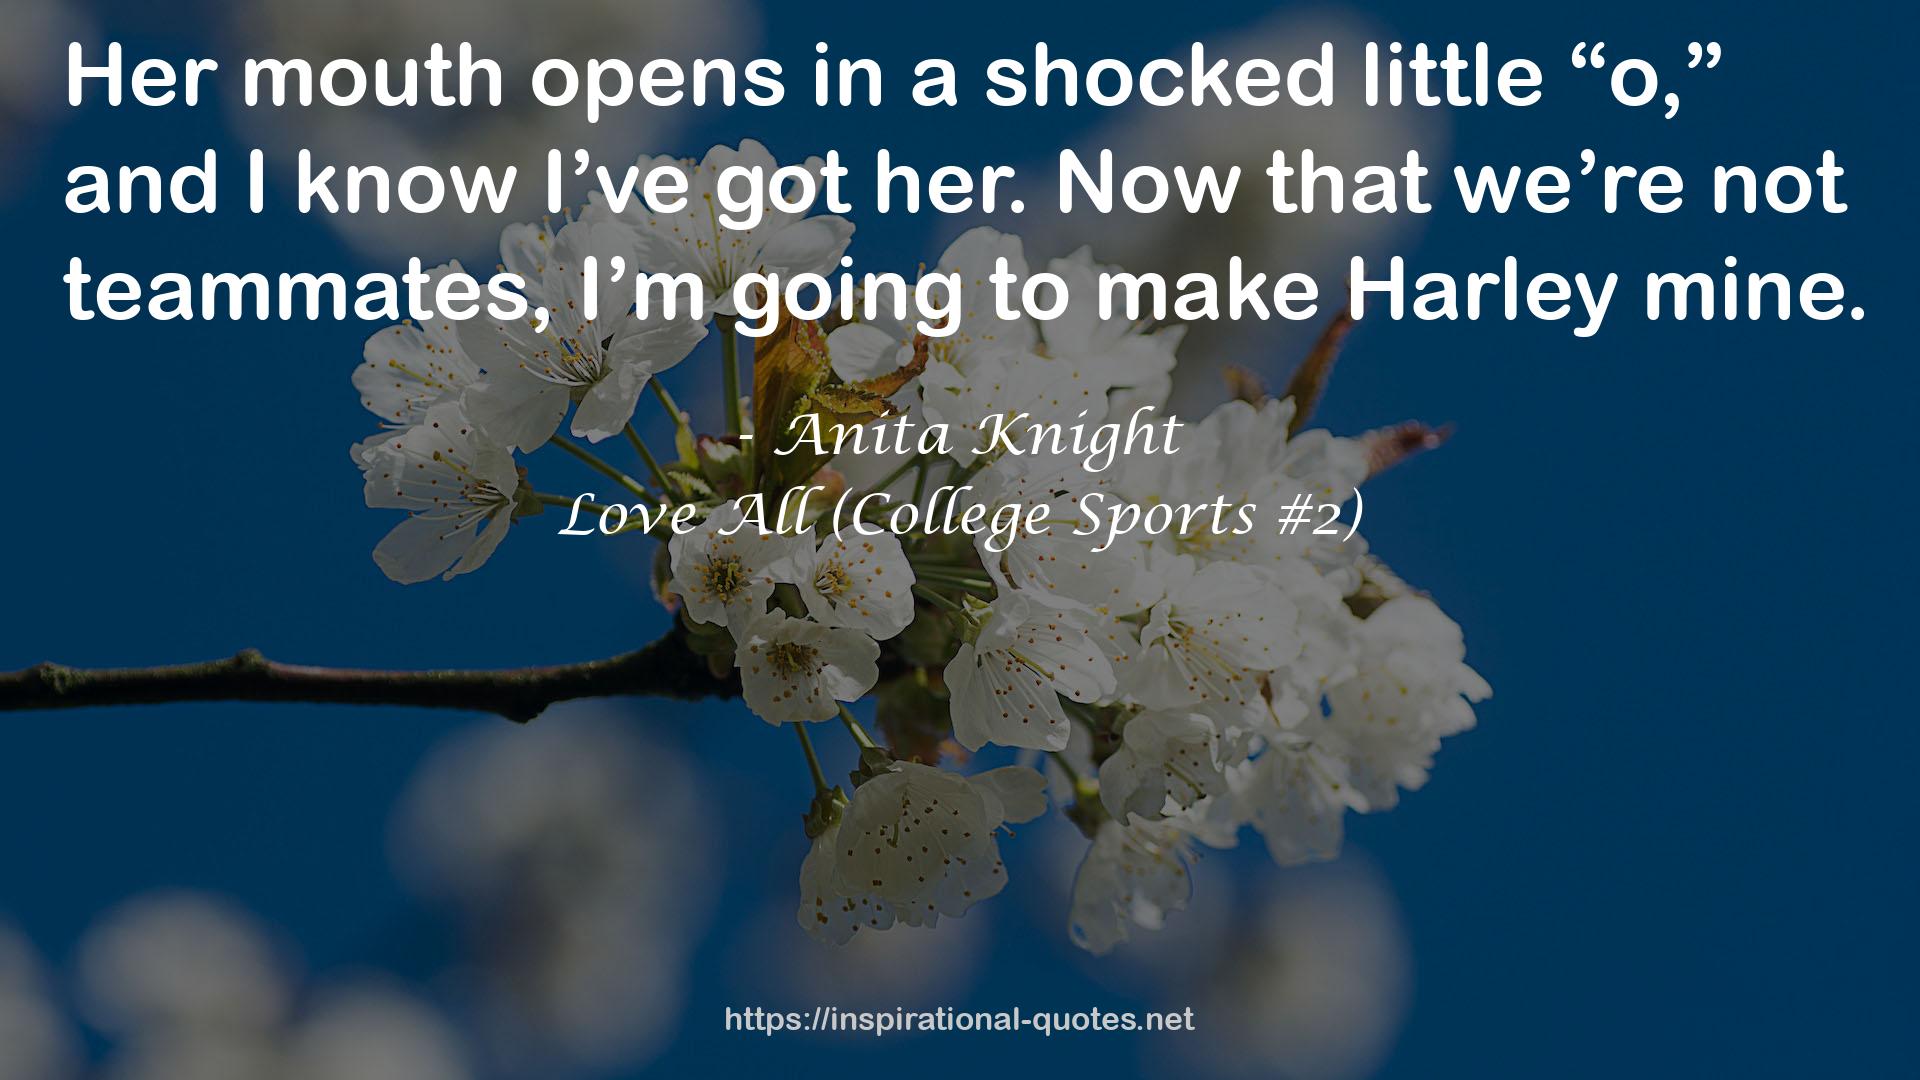 Love All (College Sports #2) QUOTES